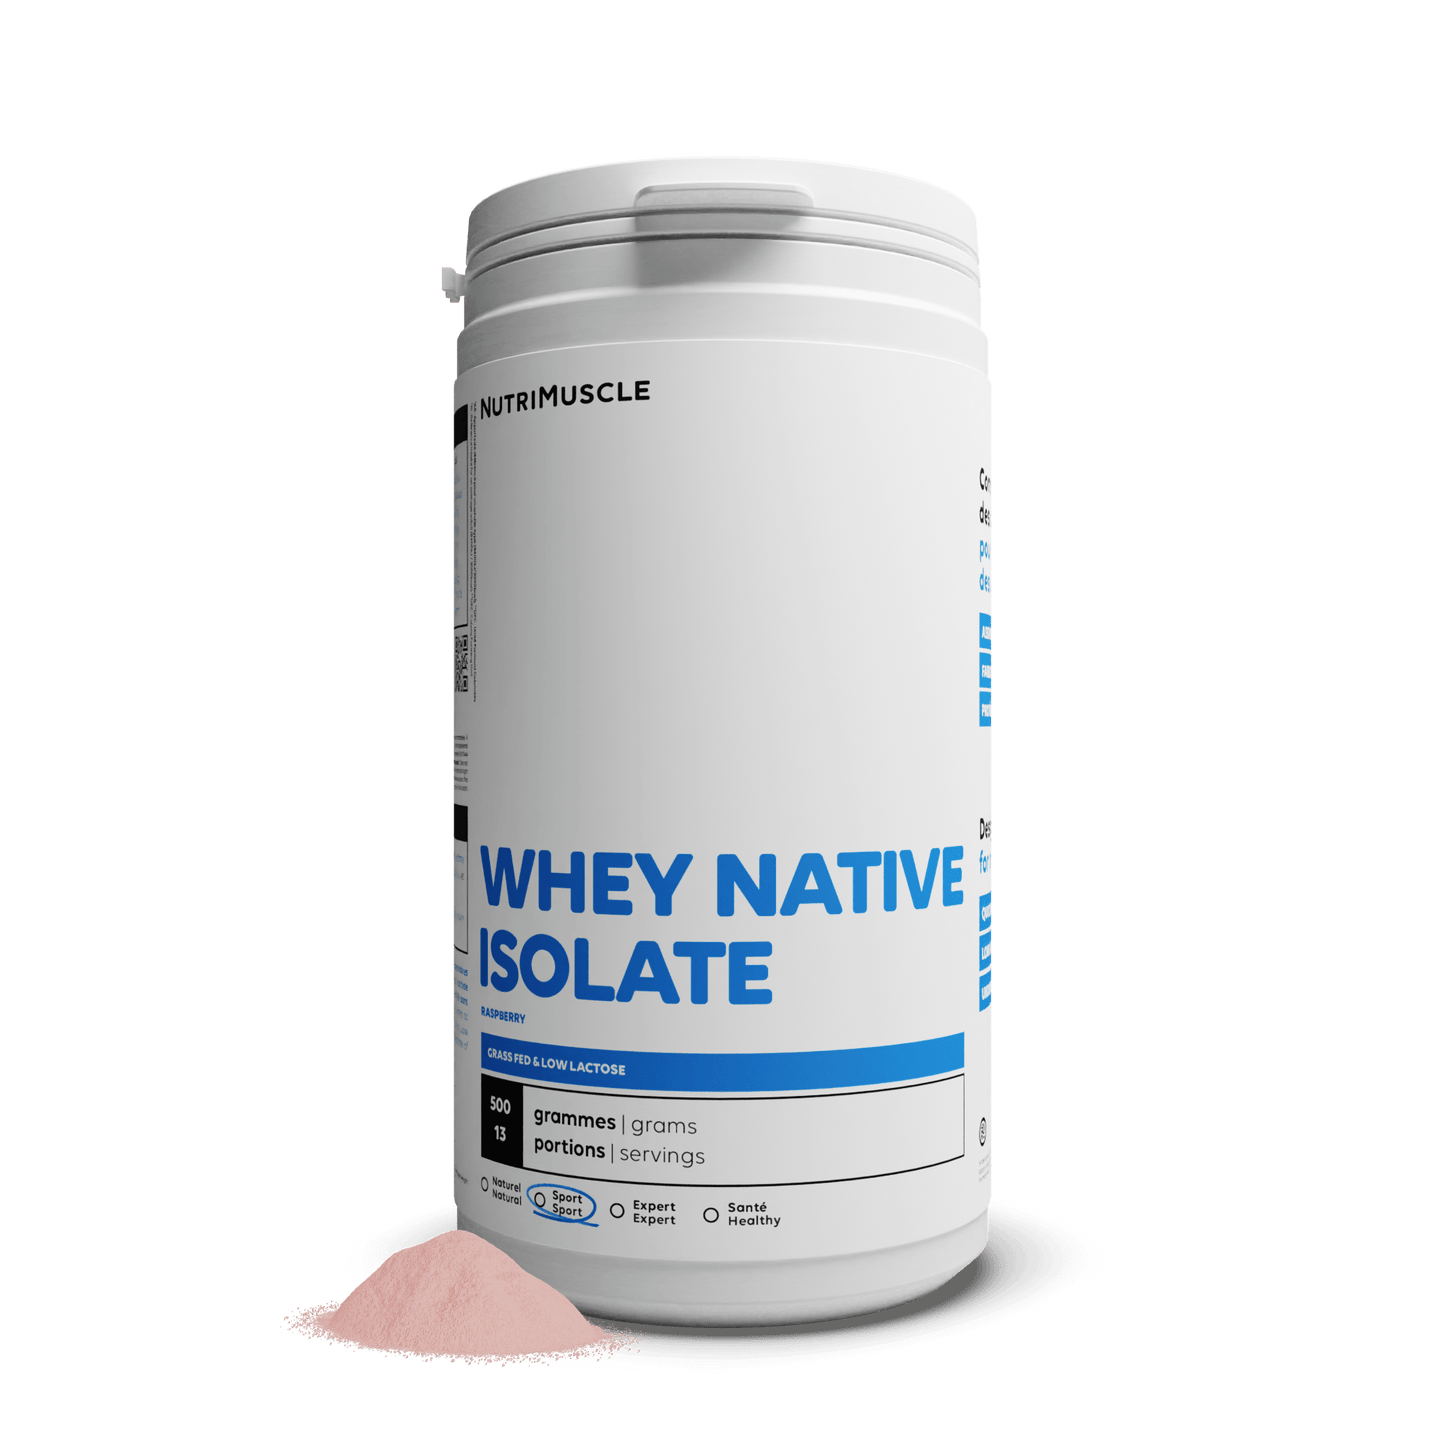 Nutrimuscle Protéines Framboise / 500 g Whey Native Isolate (Low lactose)